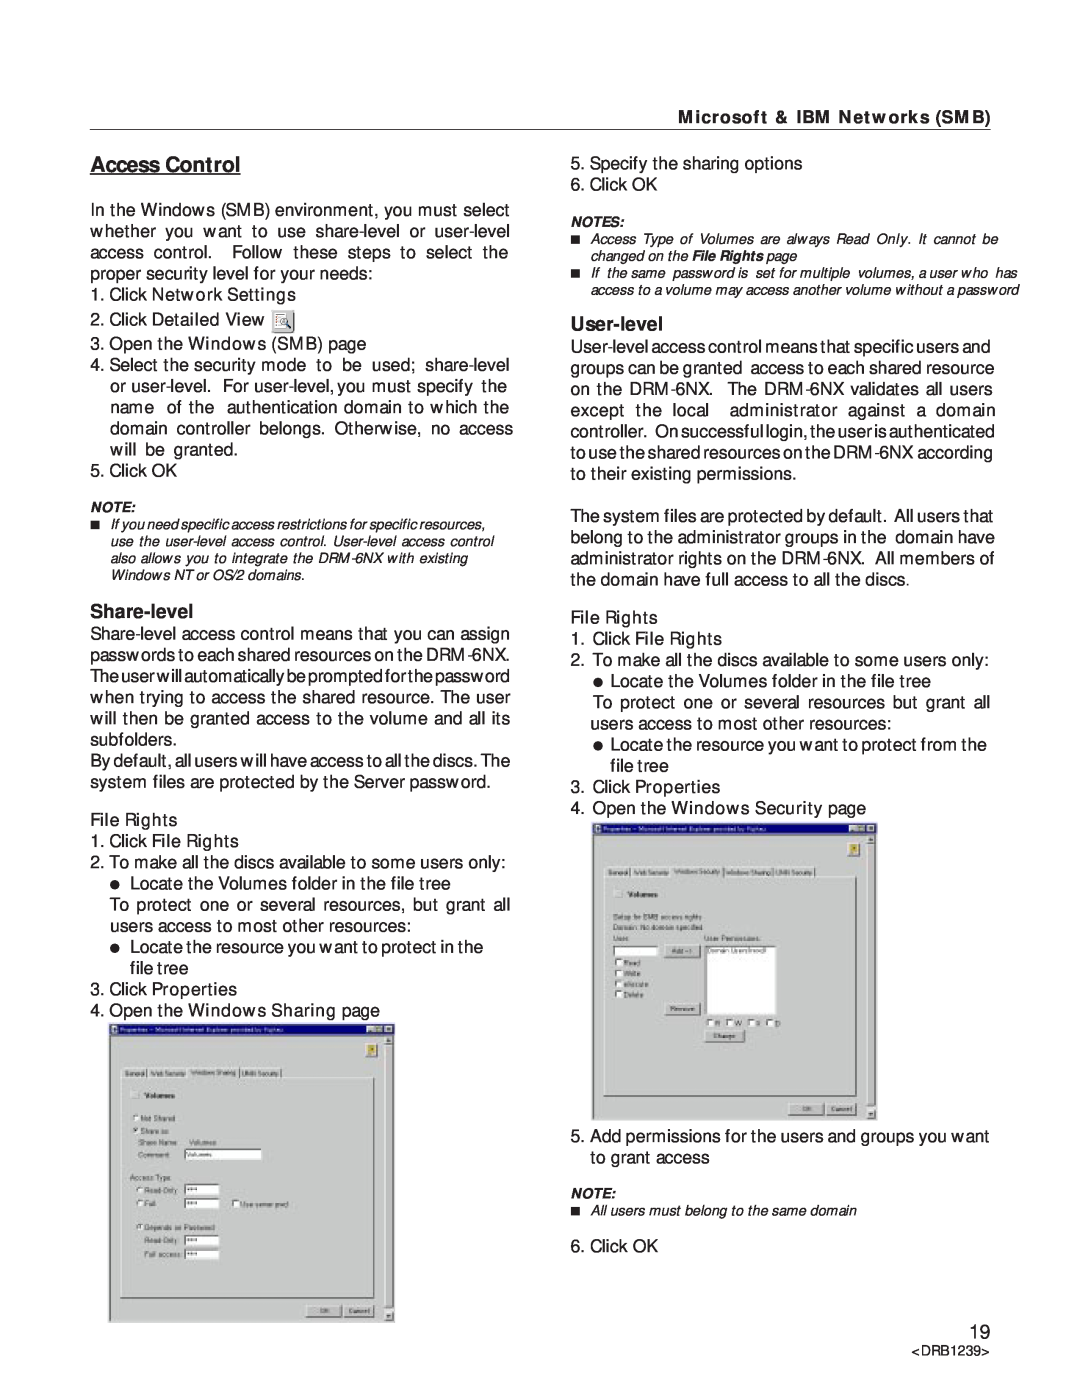 Pioneer DRM-6NX manual Access Control, User-level, Share-level, Microsoft & IBM Networks SMB 